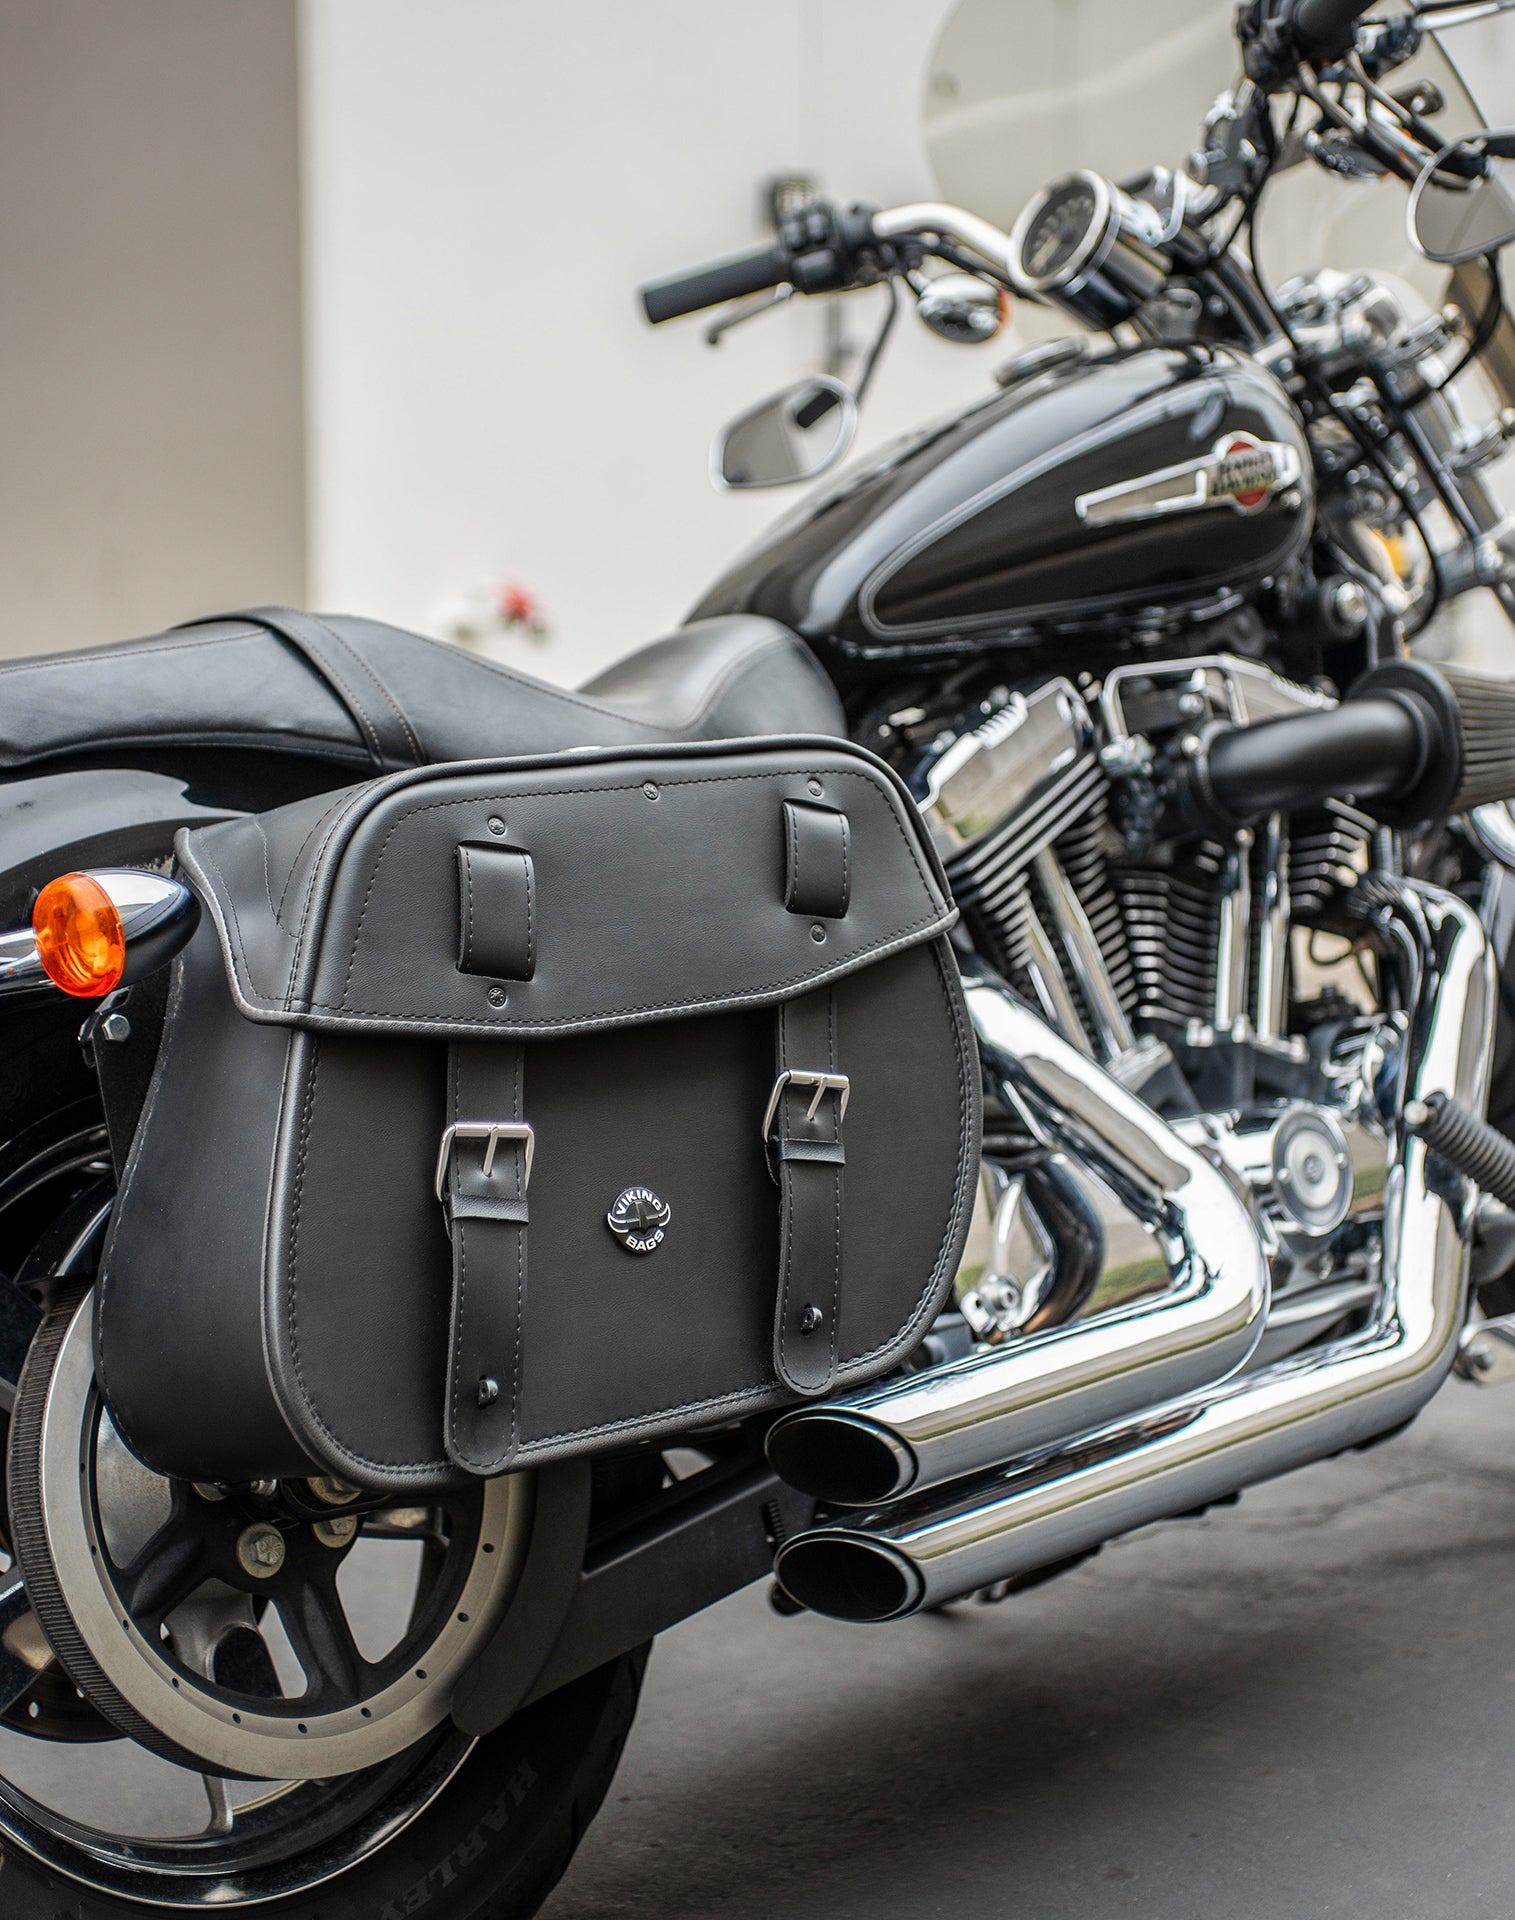 25L - Arch Large Shock Cutout Leather Motorcycle Saddlebags for Harley Sportster 1200 Custom XL1200C/XLH1200C